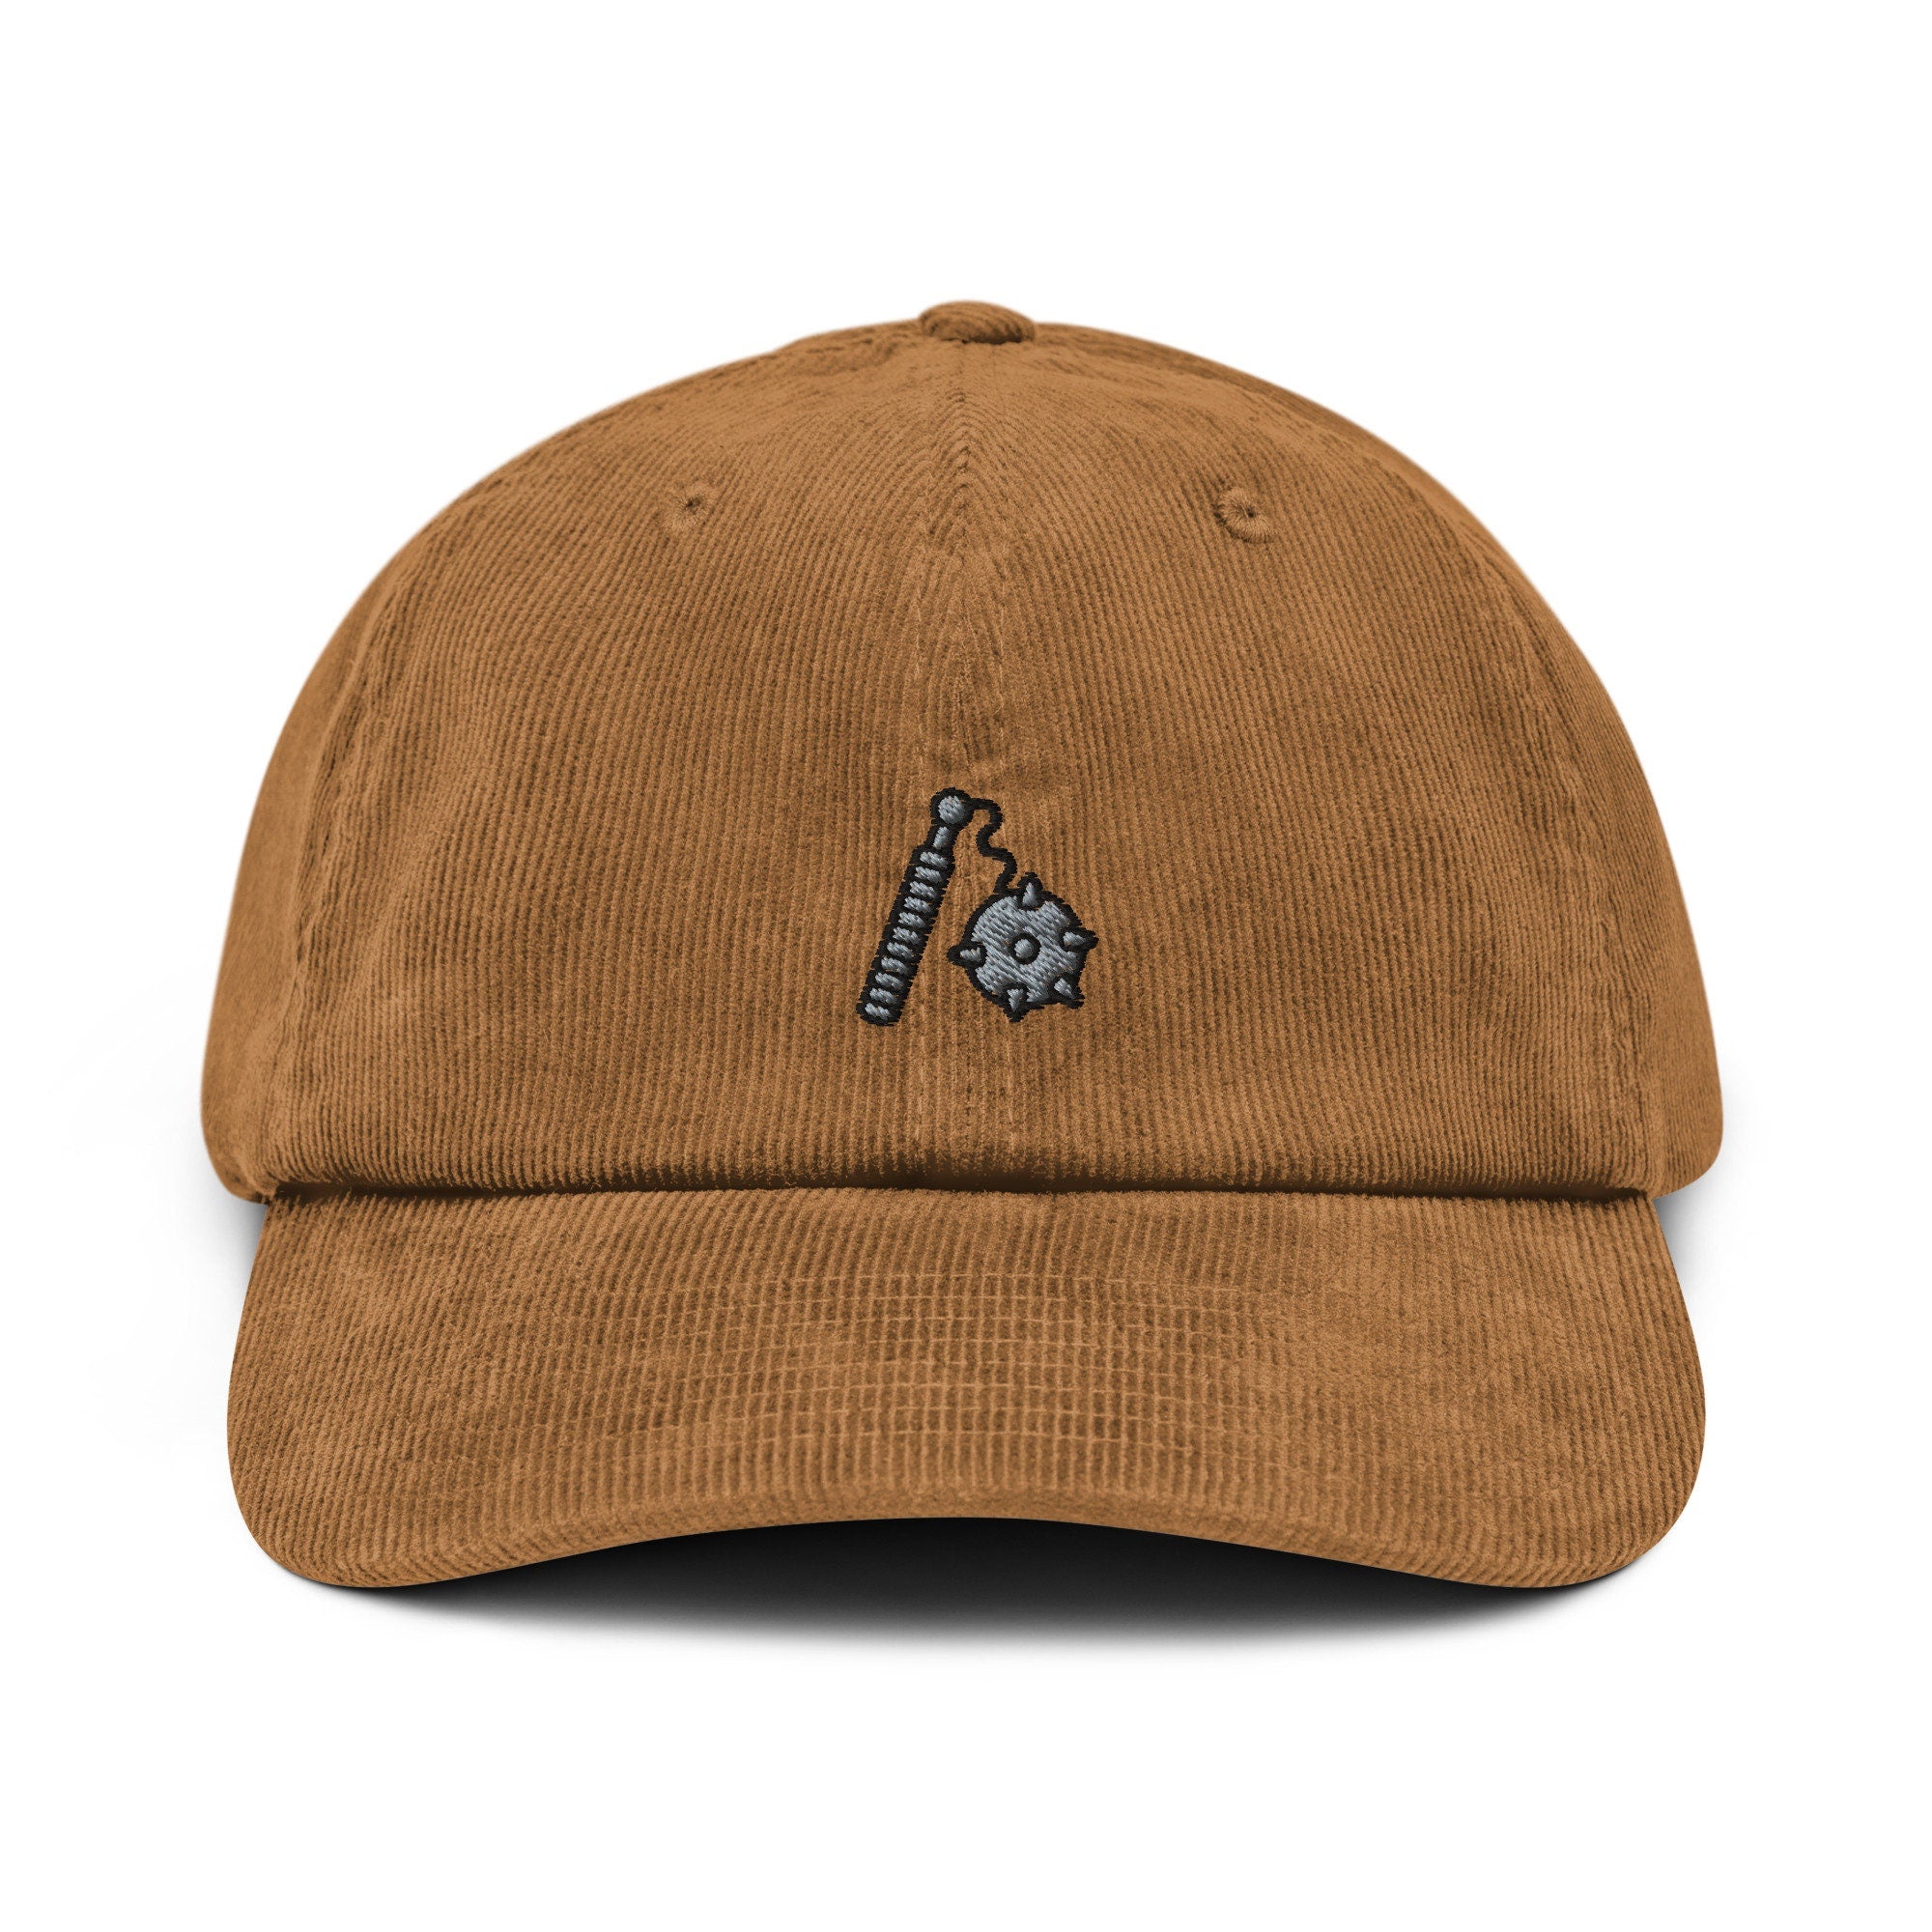 Morning Star Corduroy Hat, Handmade Embroidered Corduroy Dad Cap - Multiple Colors